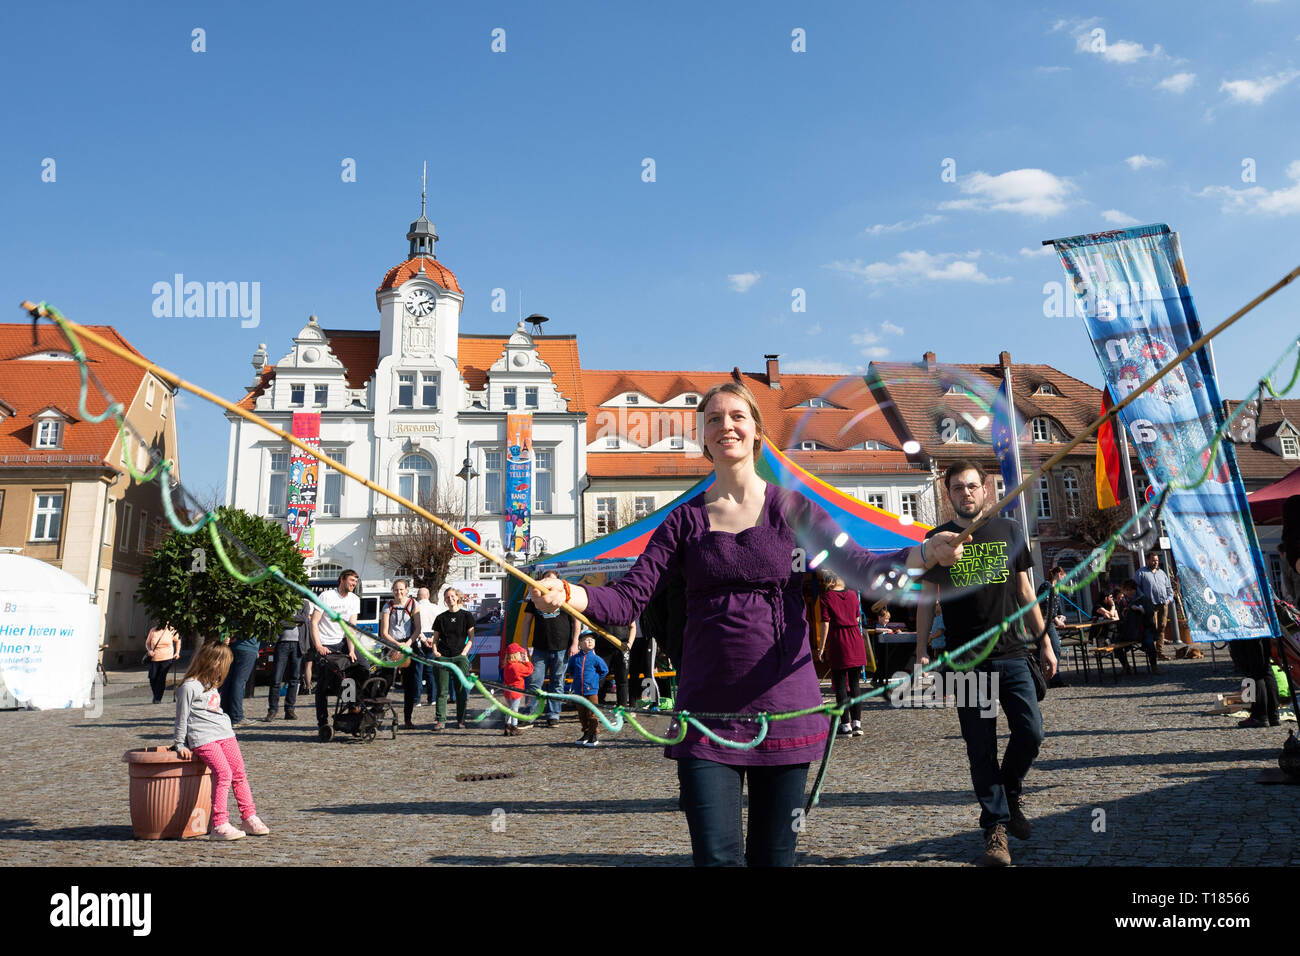 German Skinheads High Resolution Stock Photography and Images - Alamy